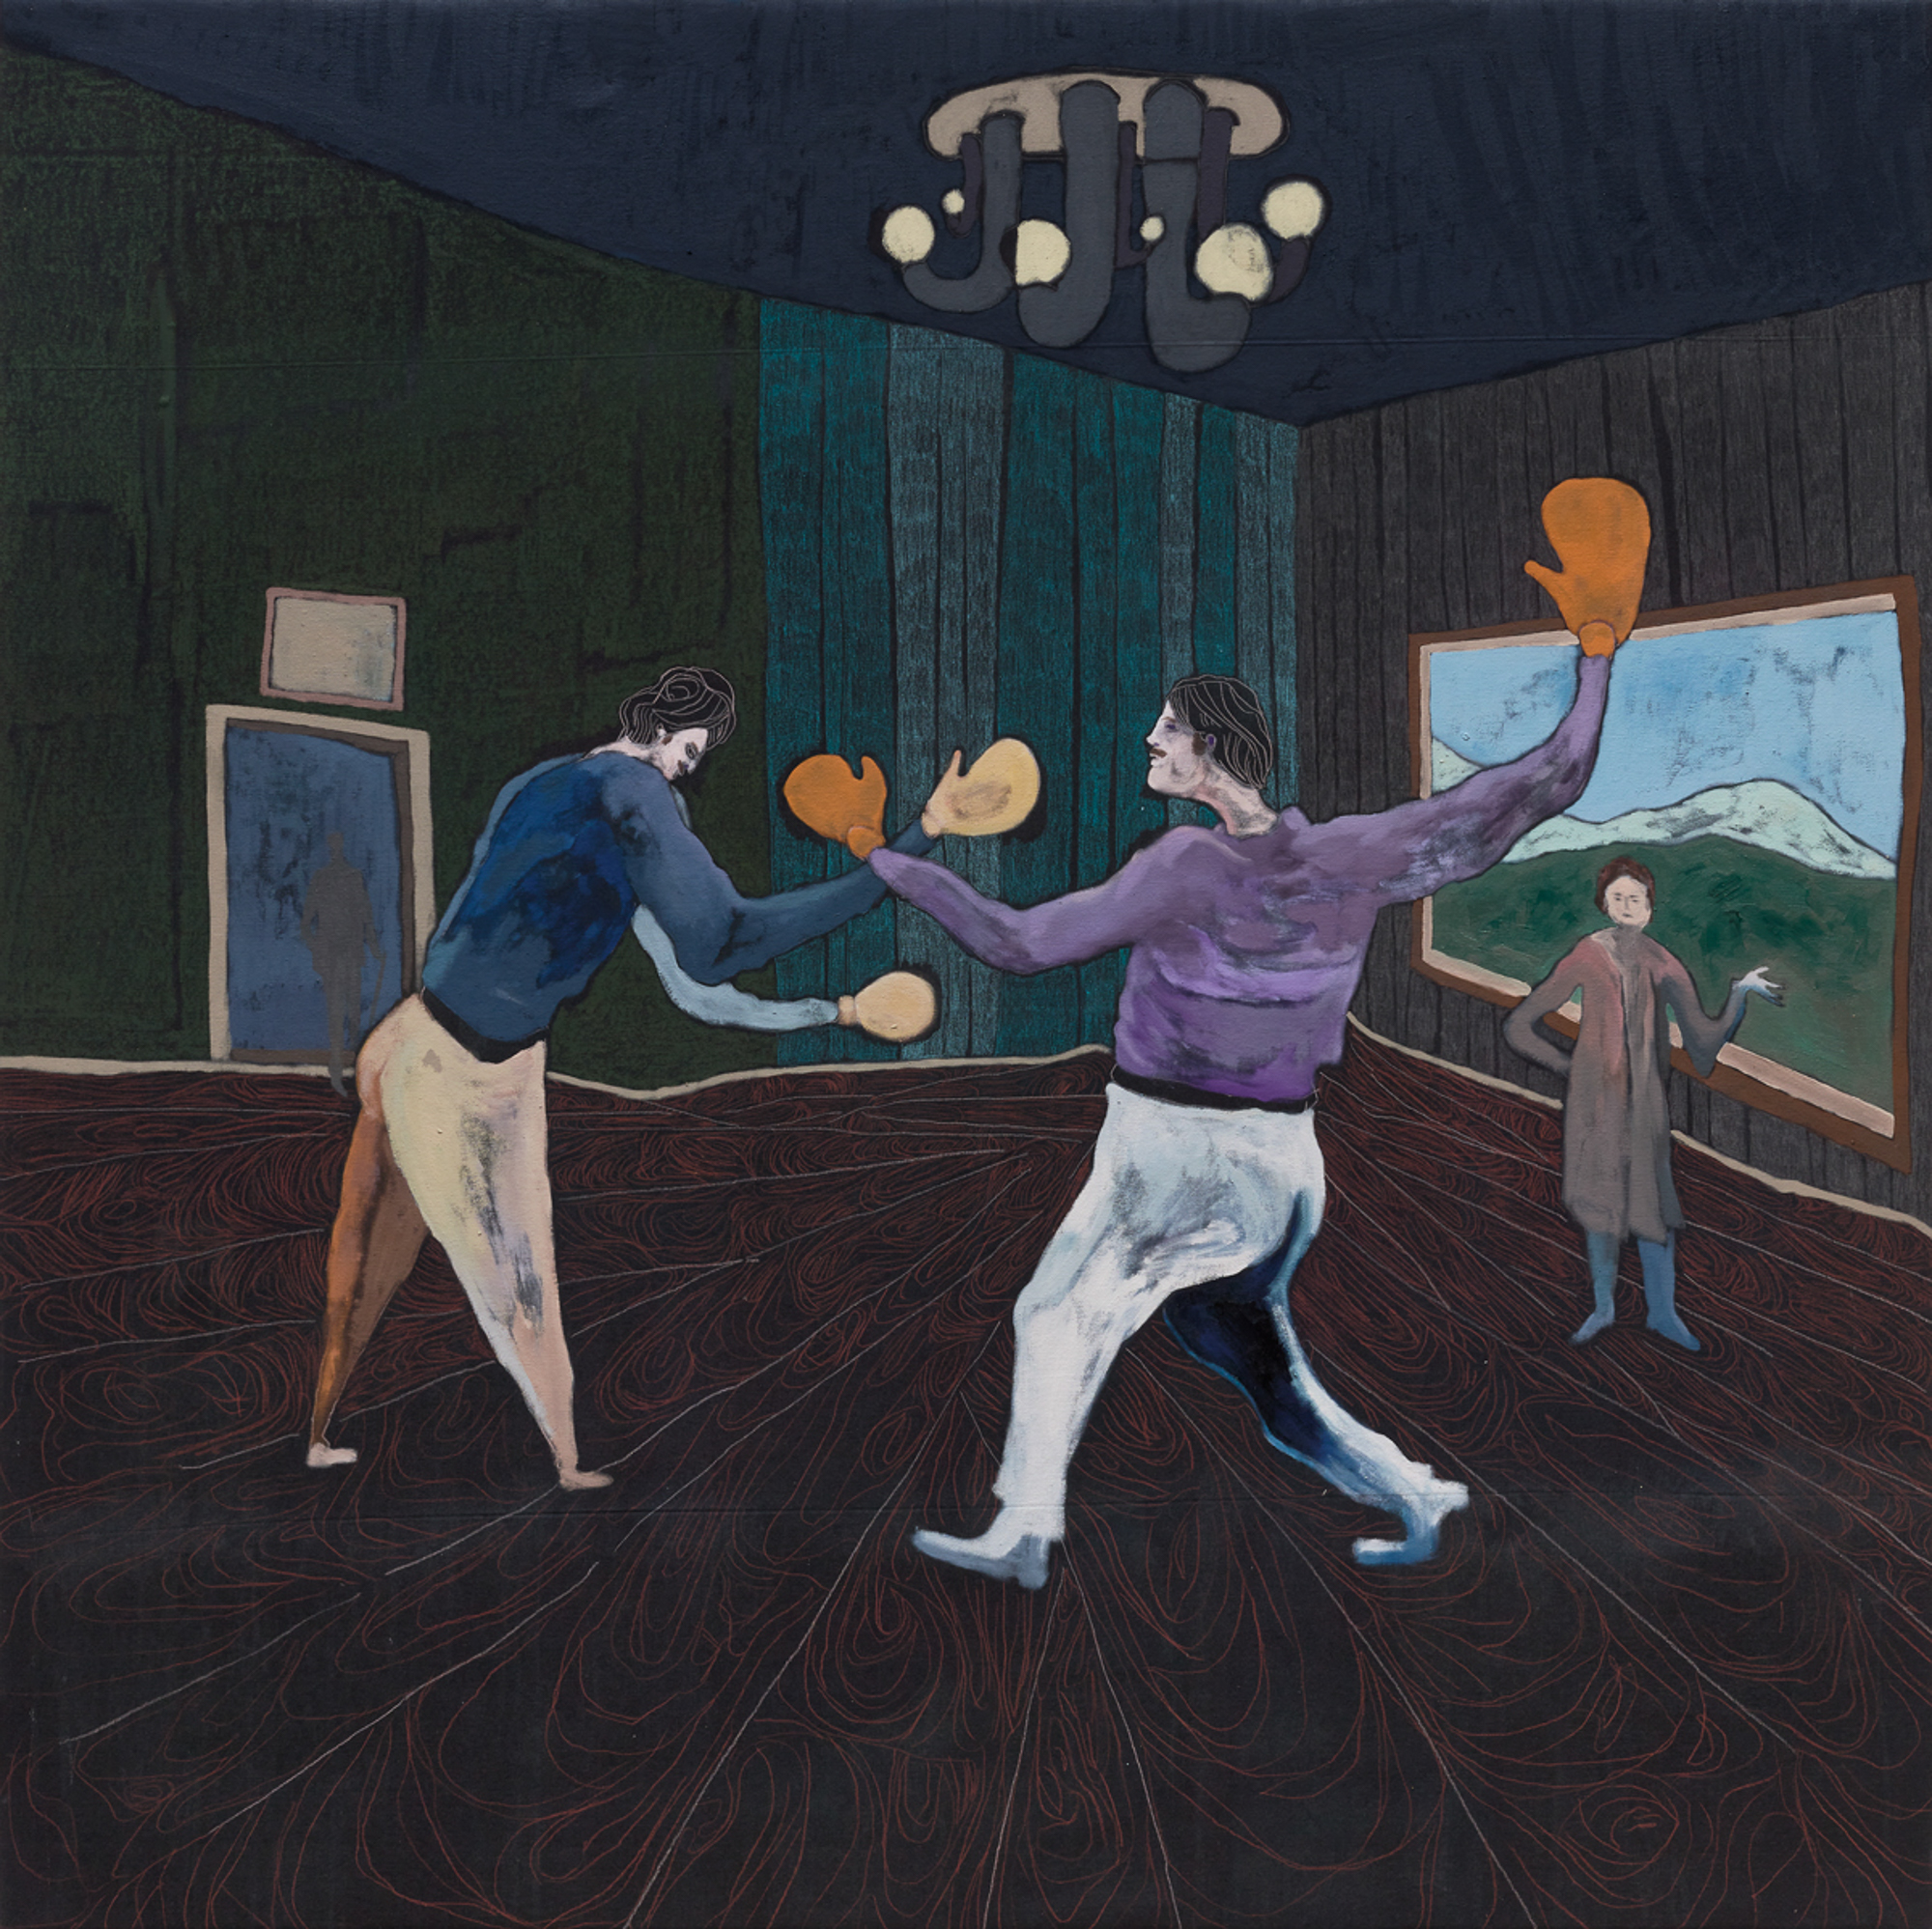 Boxing Lessons, 2020, mixed media on canvas, 155 x 155 cm